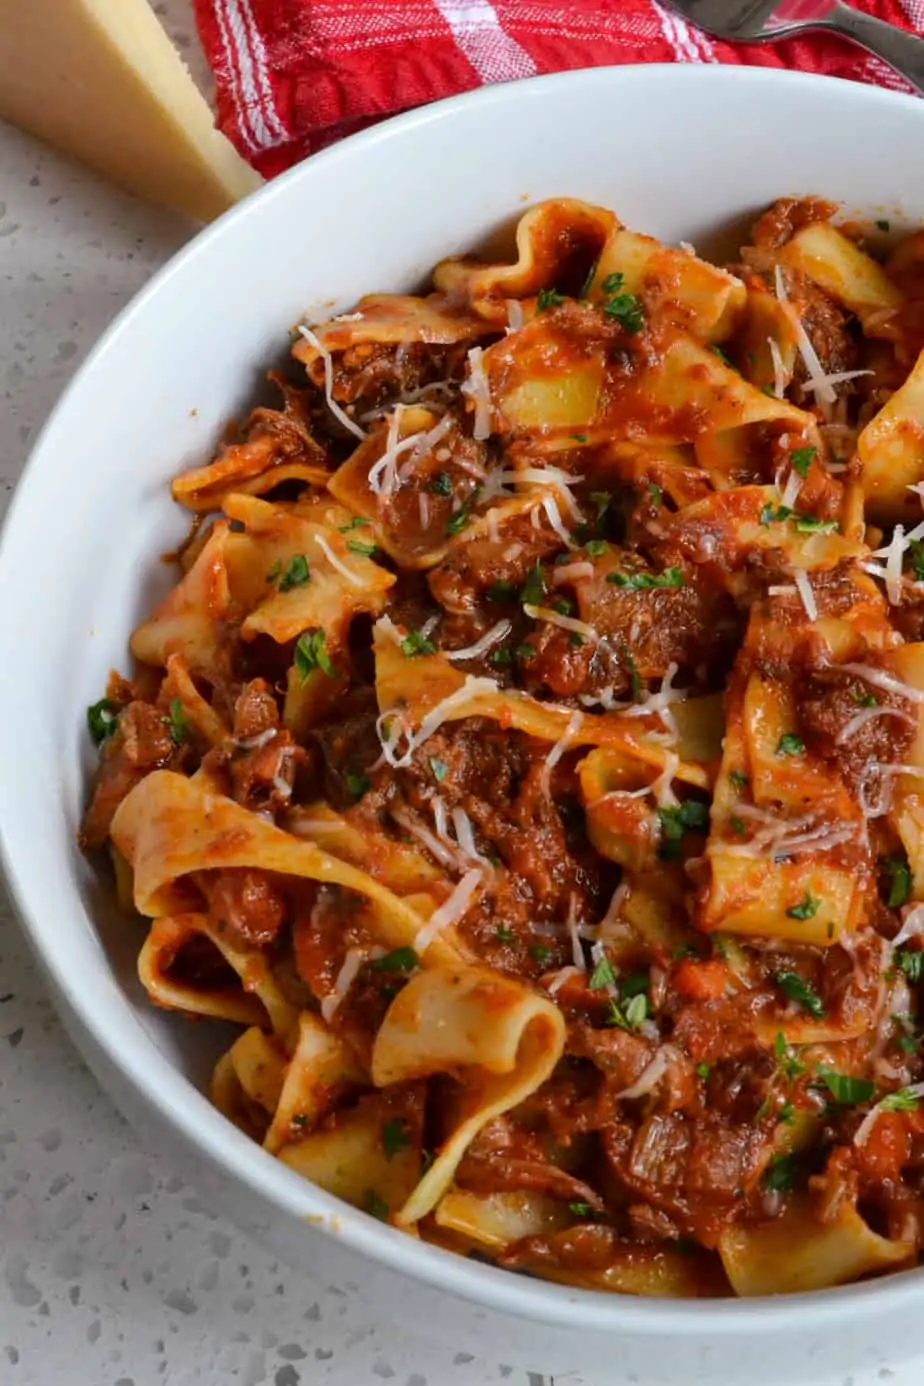 Pappardelle pasta mixed with slow cooked beef ragu. 